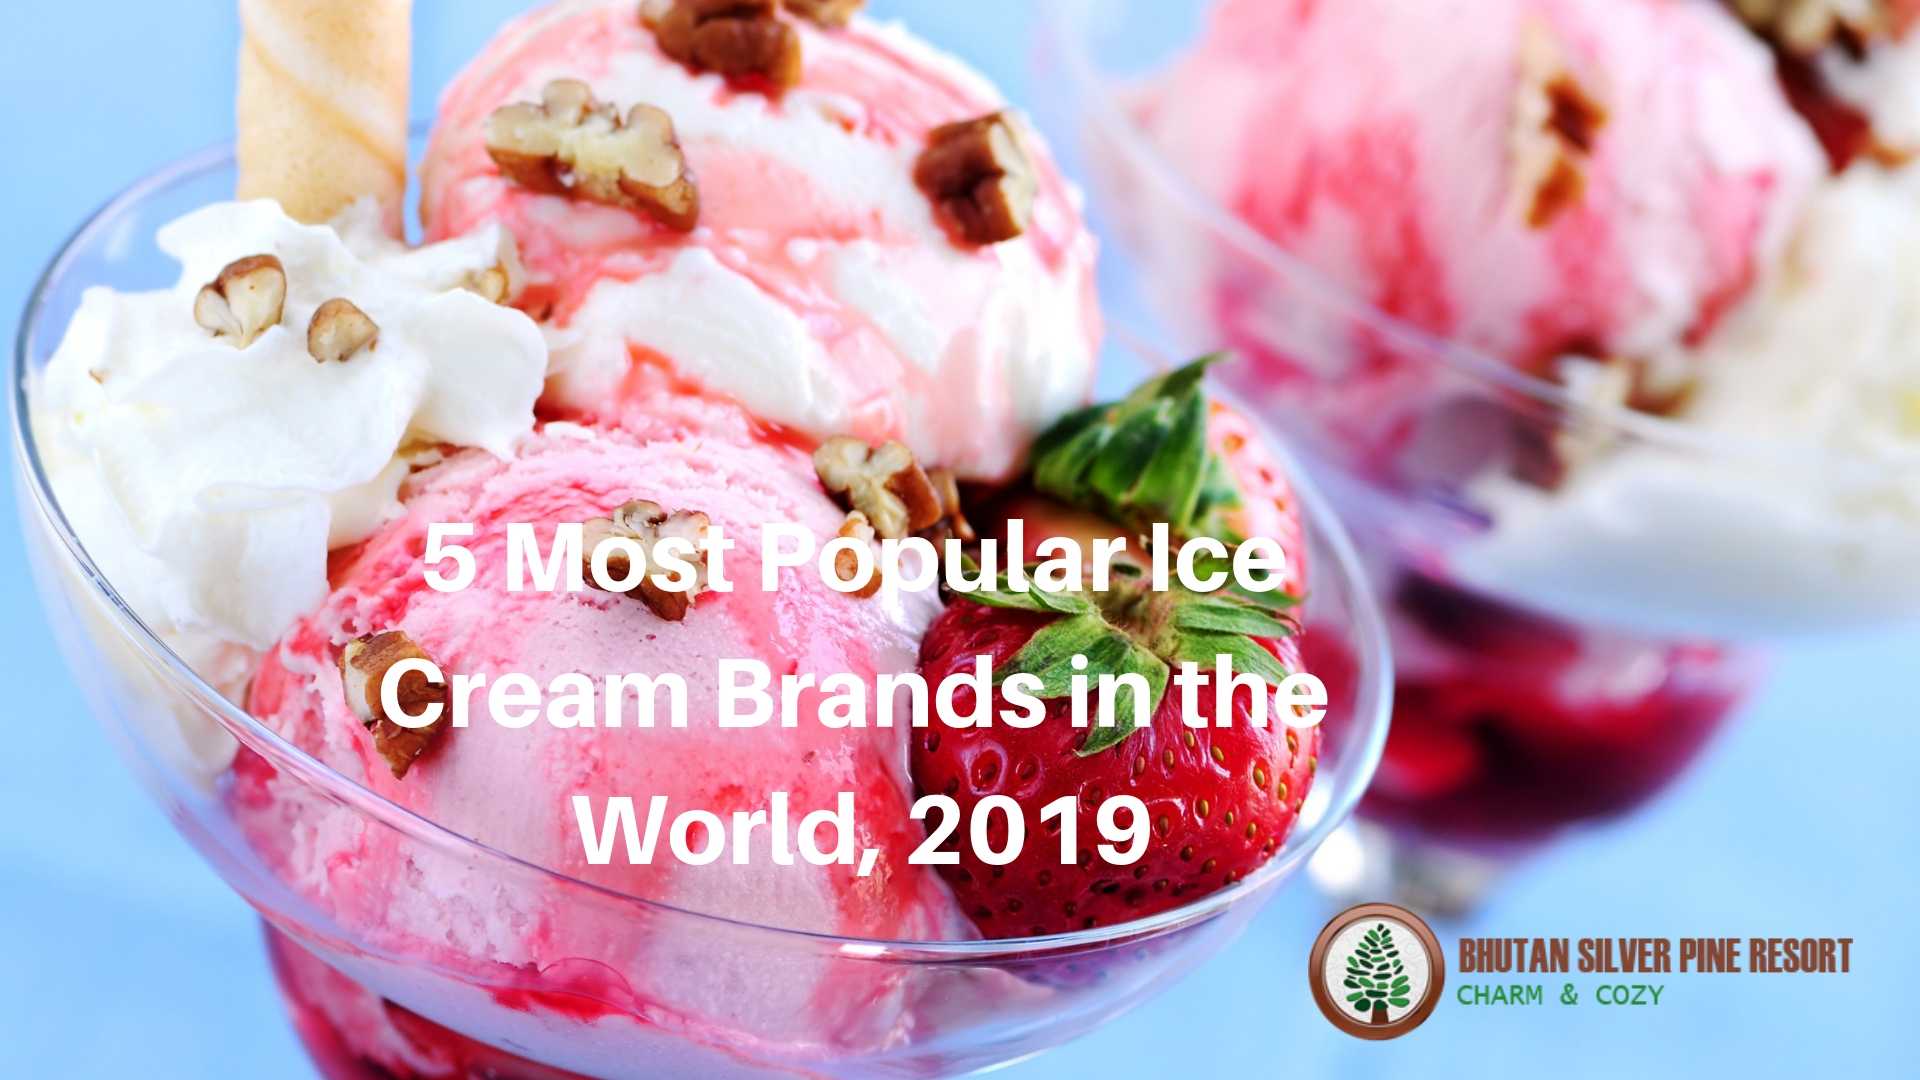 5 Most Popular Ice Cream Brands in the World, 2019